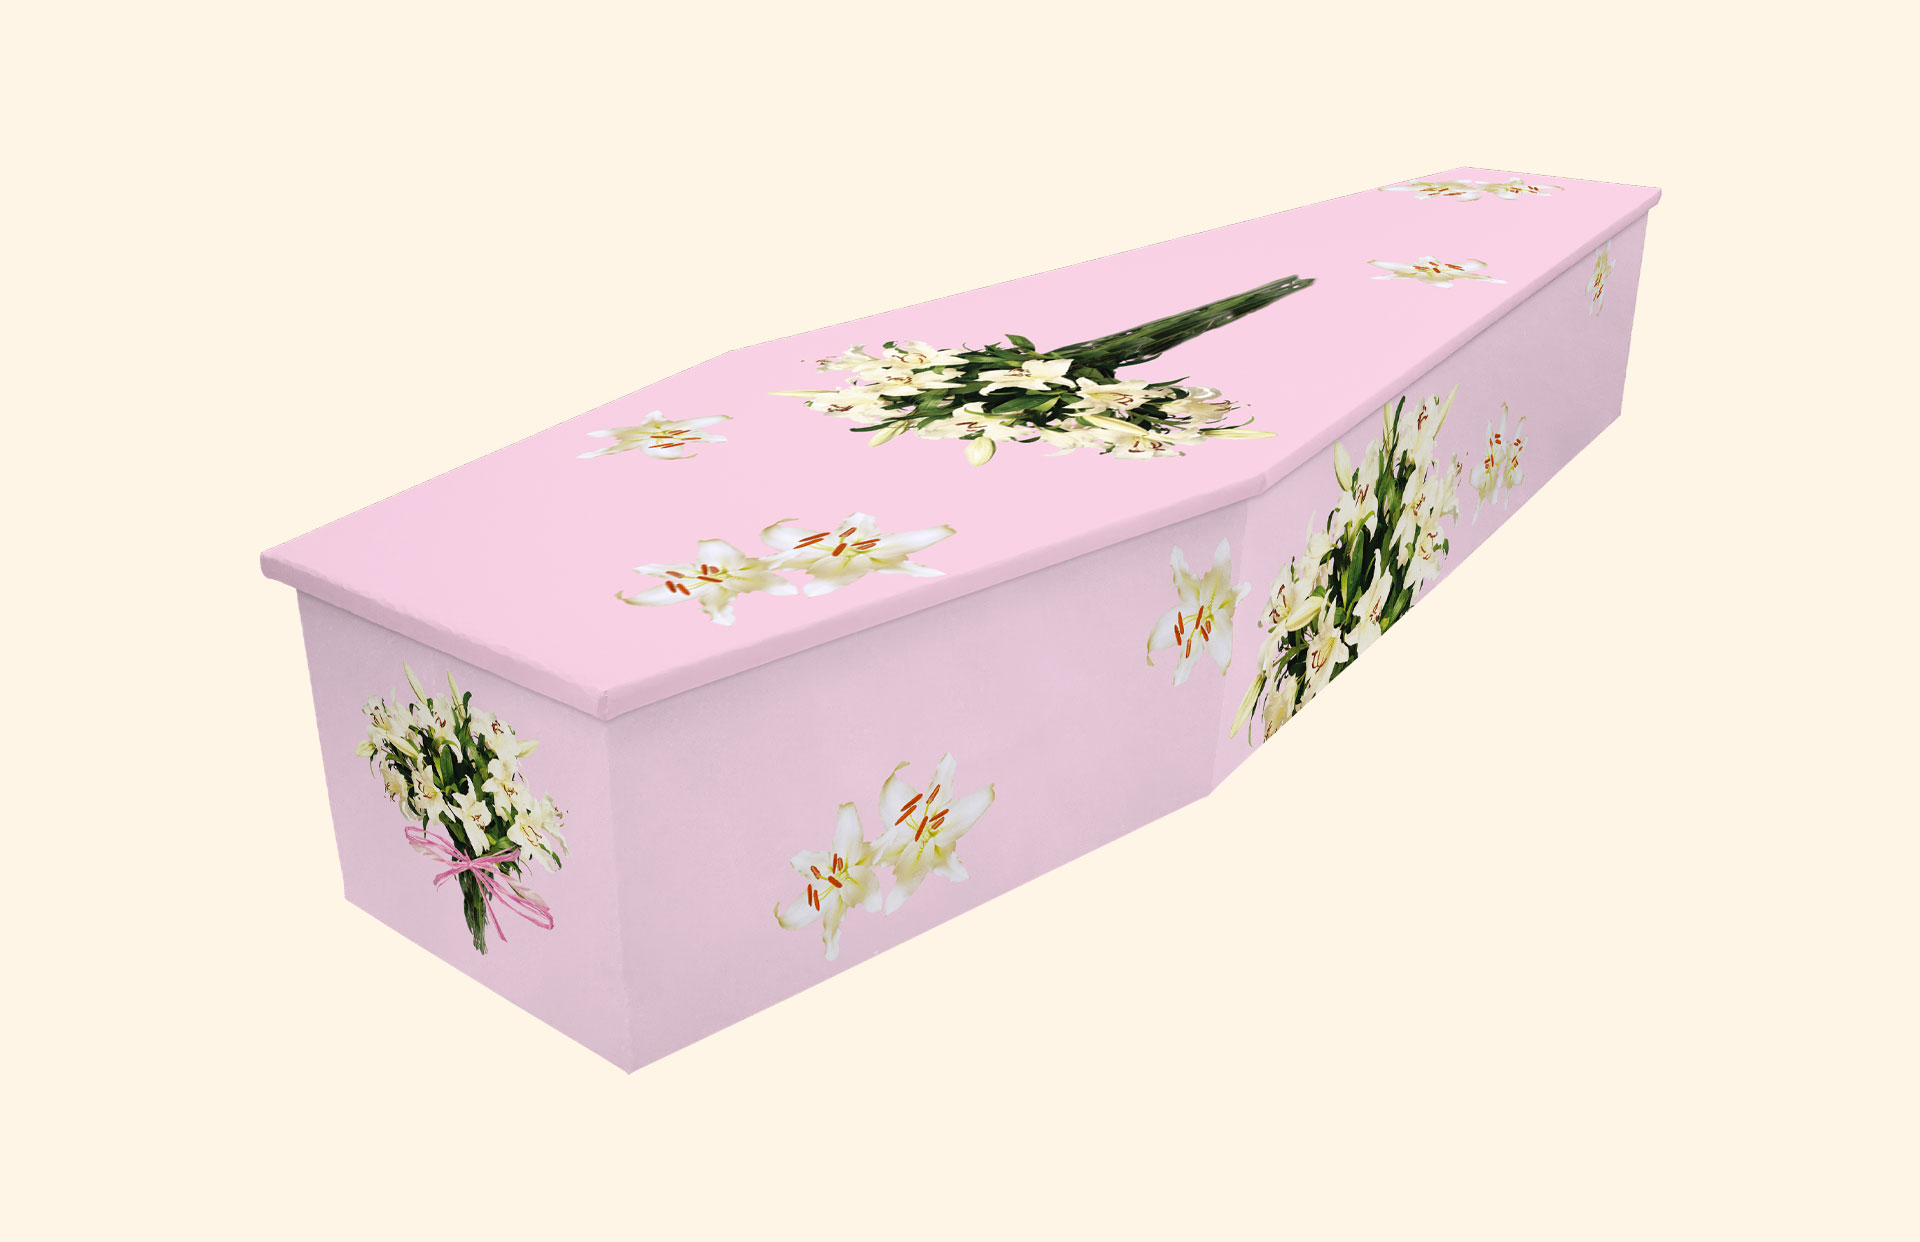 Sylvia design in pink on a cardboard coffin